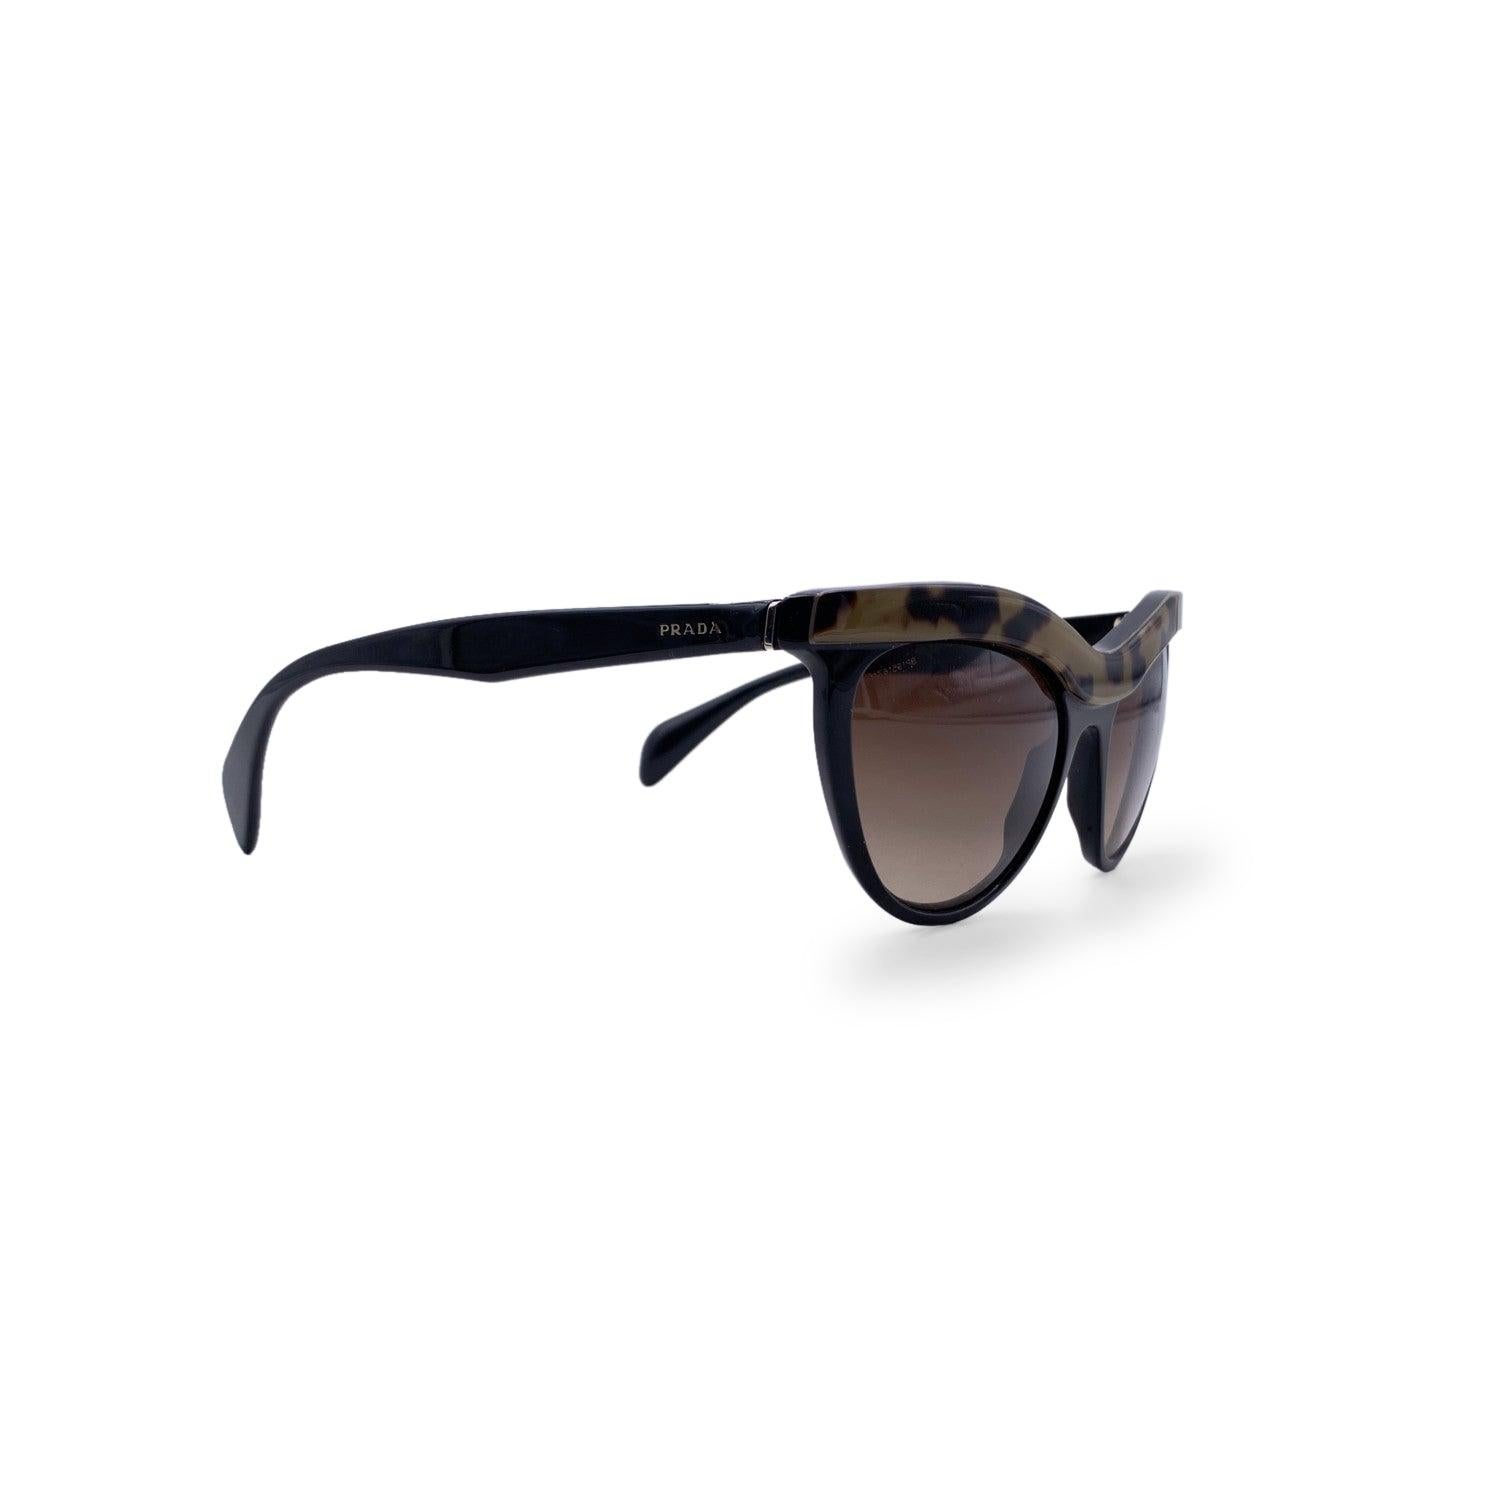 Beautiful sunglasses by Prada, mod. SPR 06P col.MA5-6S1. Cat- eye shape in black and spotted acetate. Logo on the temples and gradient brown lenses. Mod & refs.: mod. SPR 06P col.MA5-6S1 - 54/19 - 140 - 3N. Made in Italy Condition A - EXCELLENT In